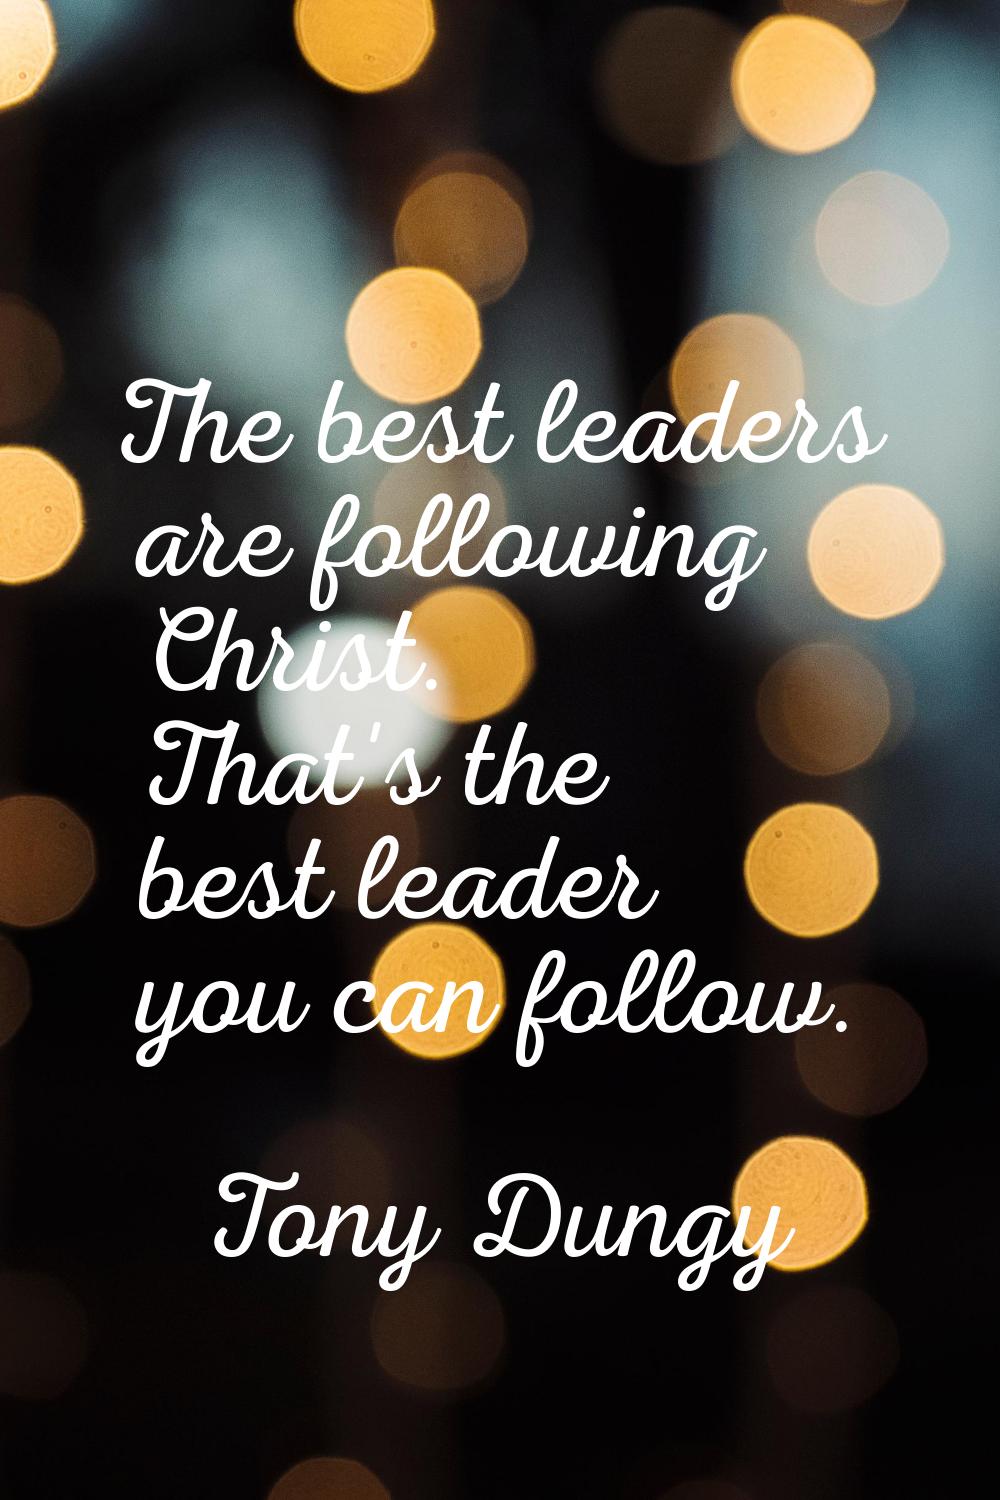 The best leaders are following Christ. That's the best leader you can follow.